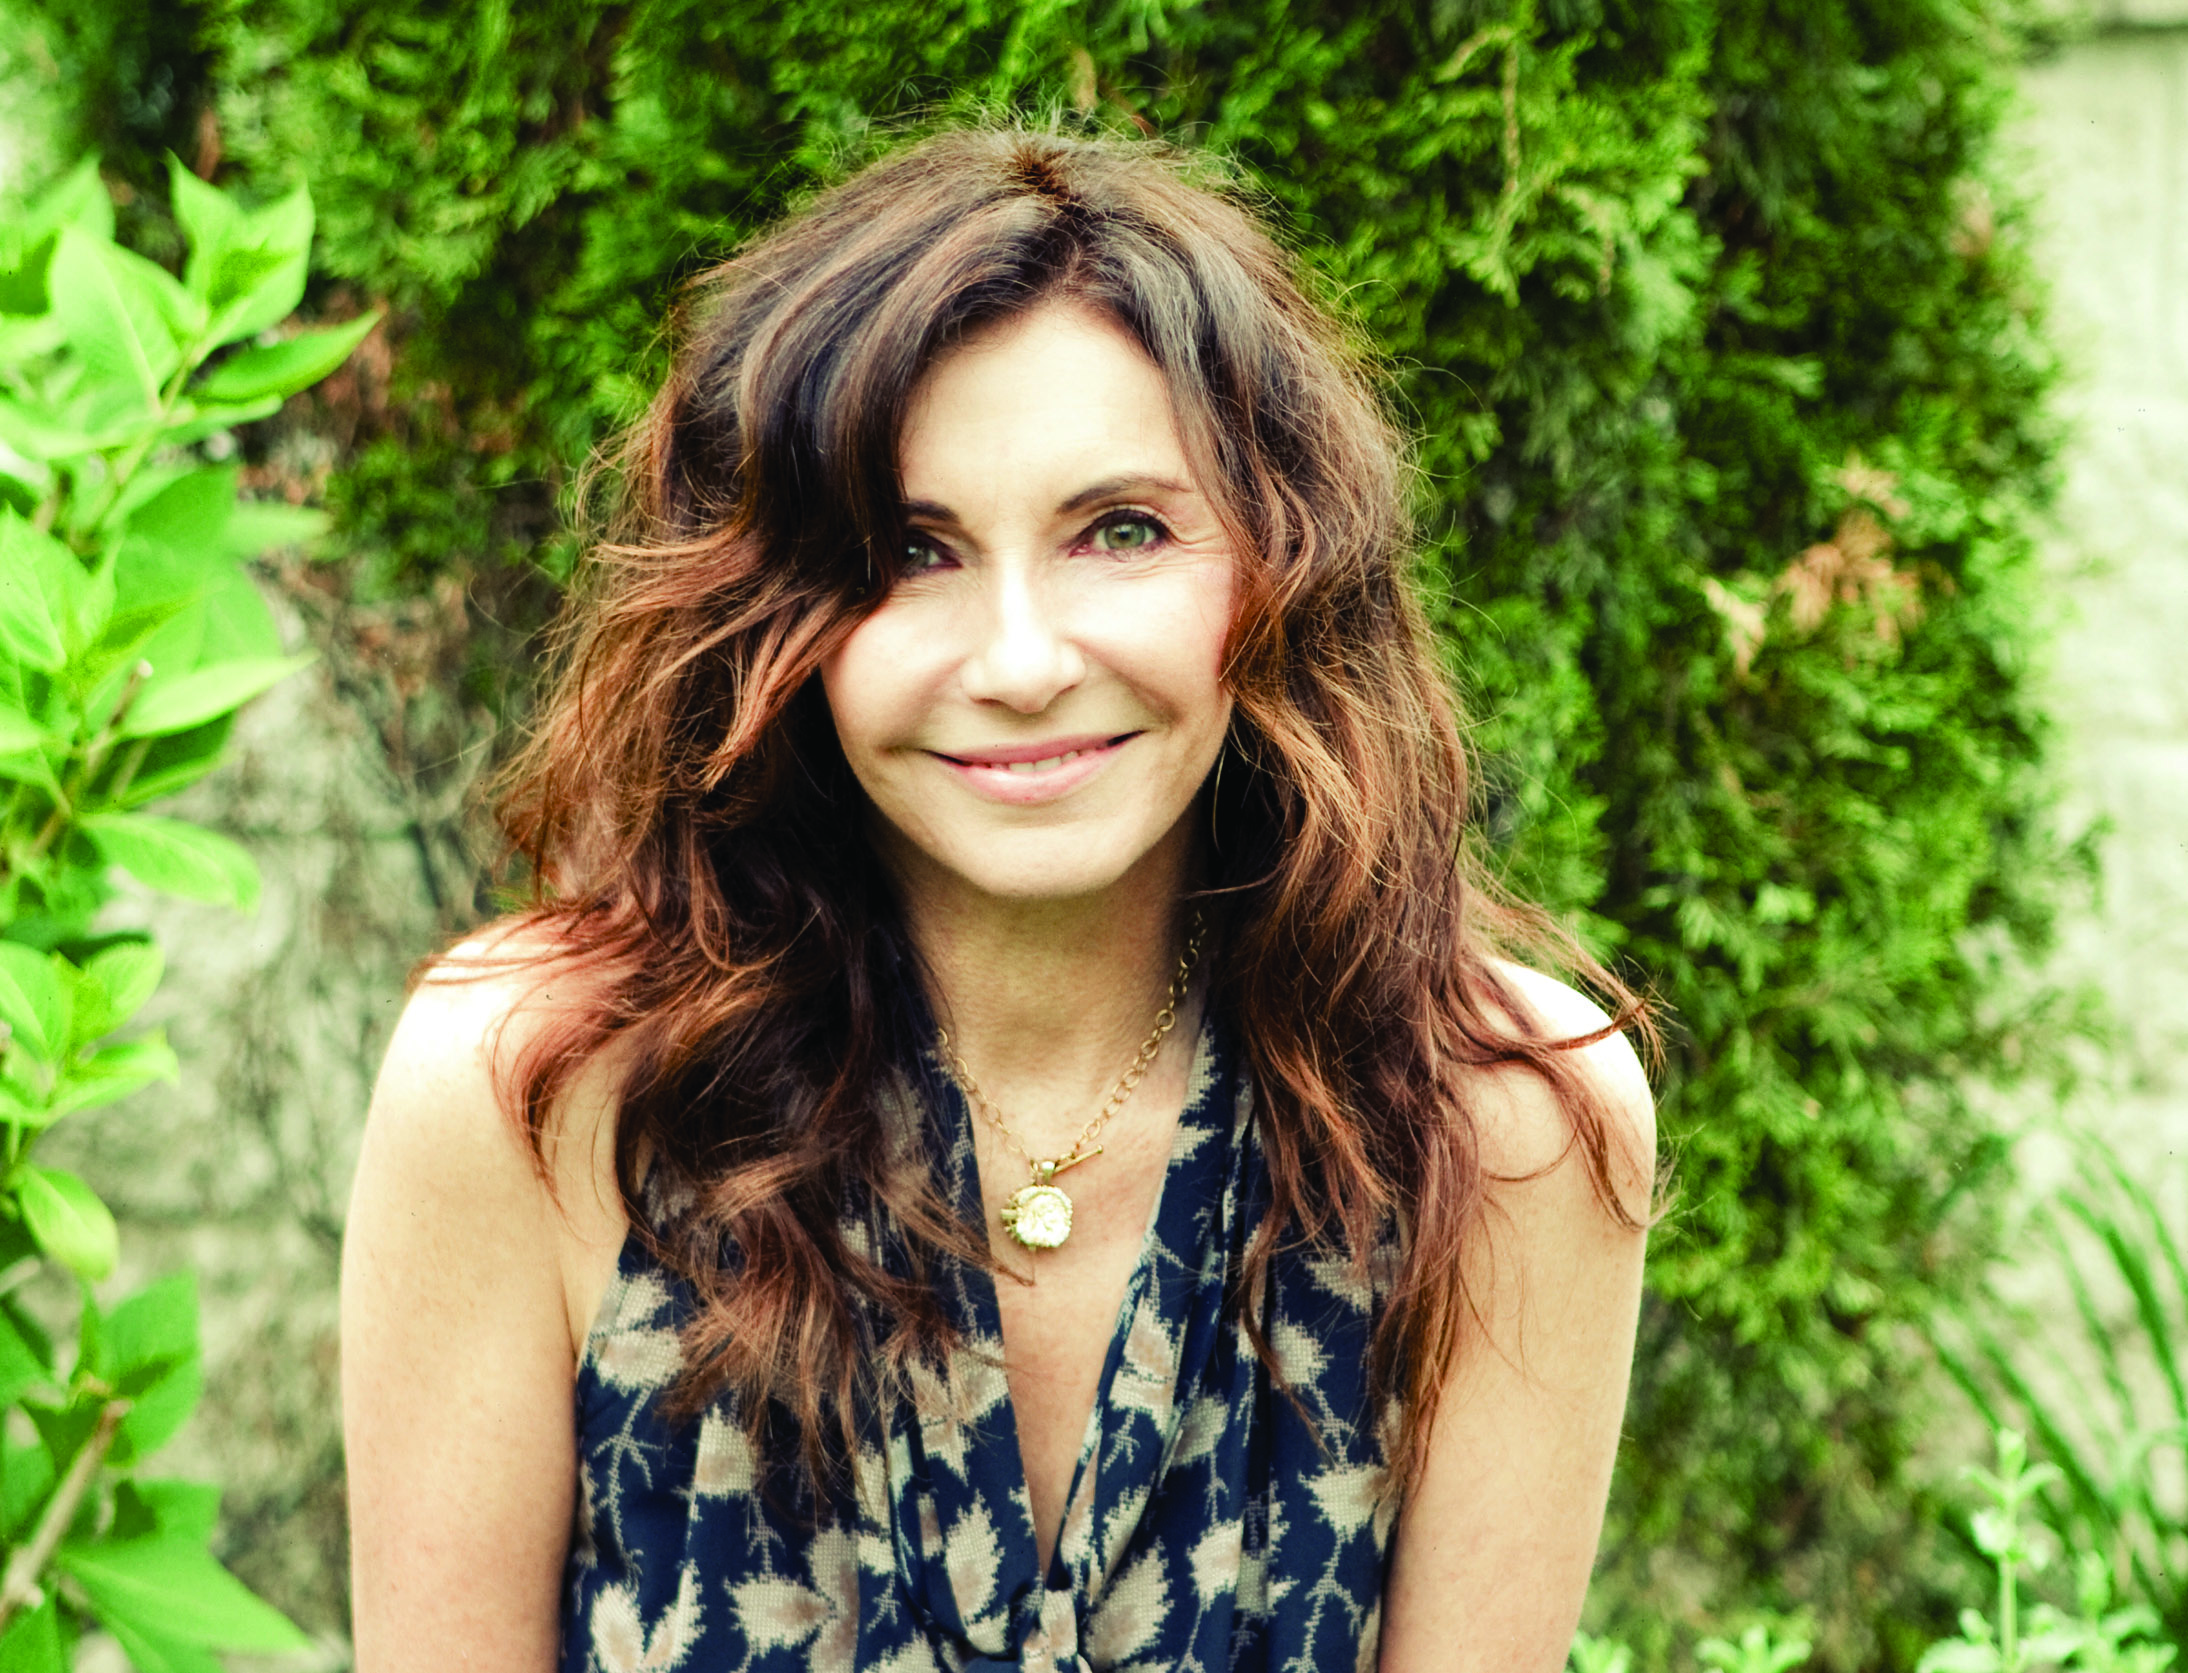 More Pictures Of Mary Steenburgen. mary steenburgen wallpapers. 